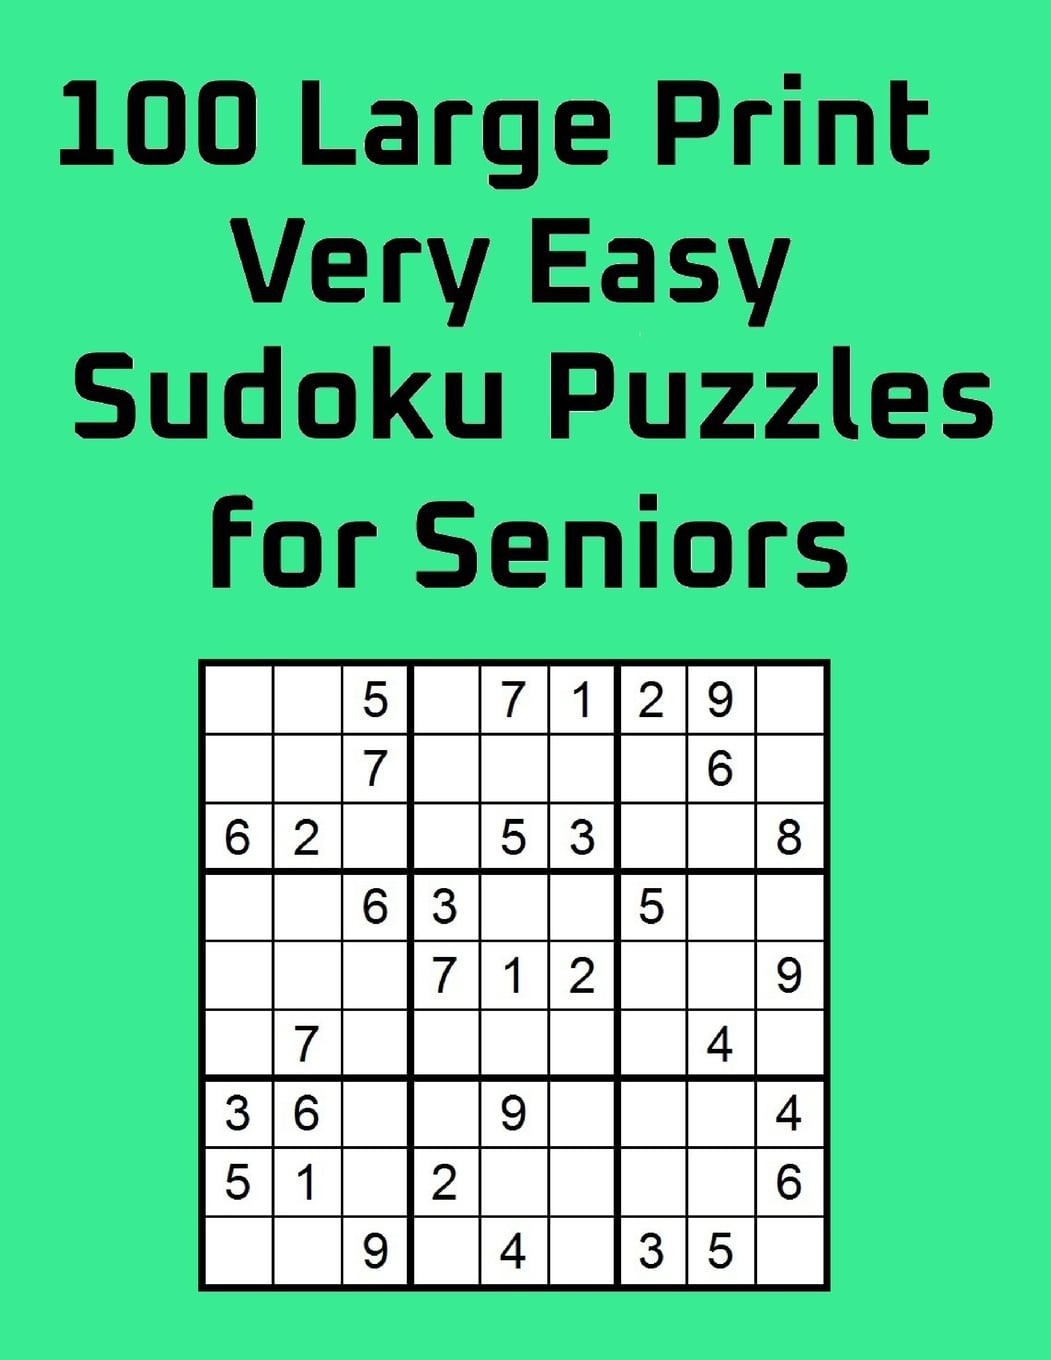 100-large-print-very-easy-sudoku-puzzles-for-seniors-one-large-puzzle-per-page-with-solutions